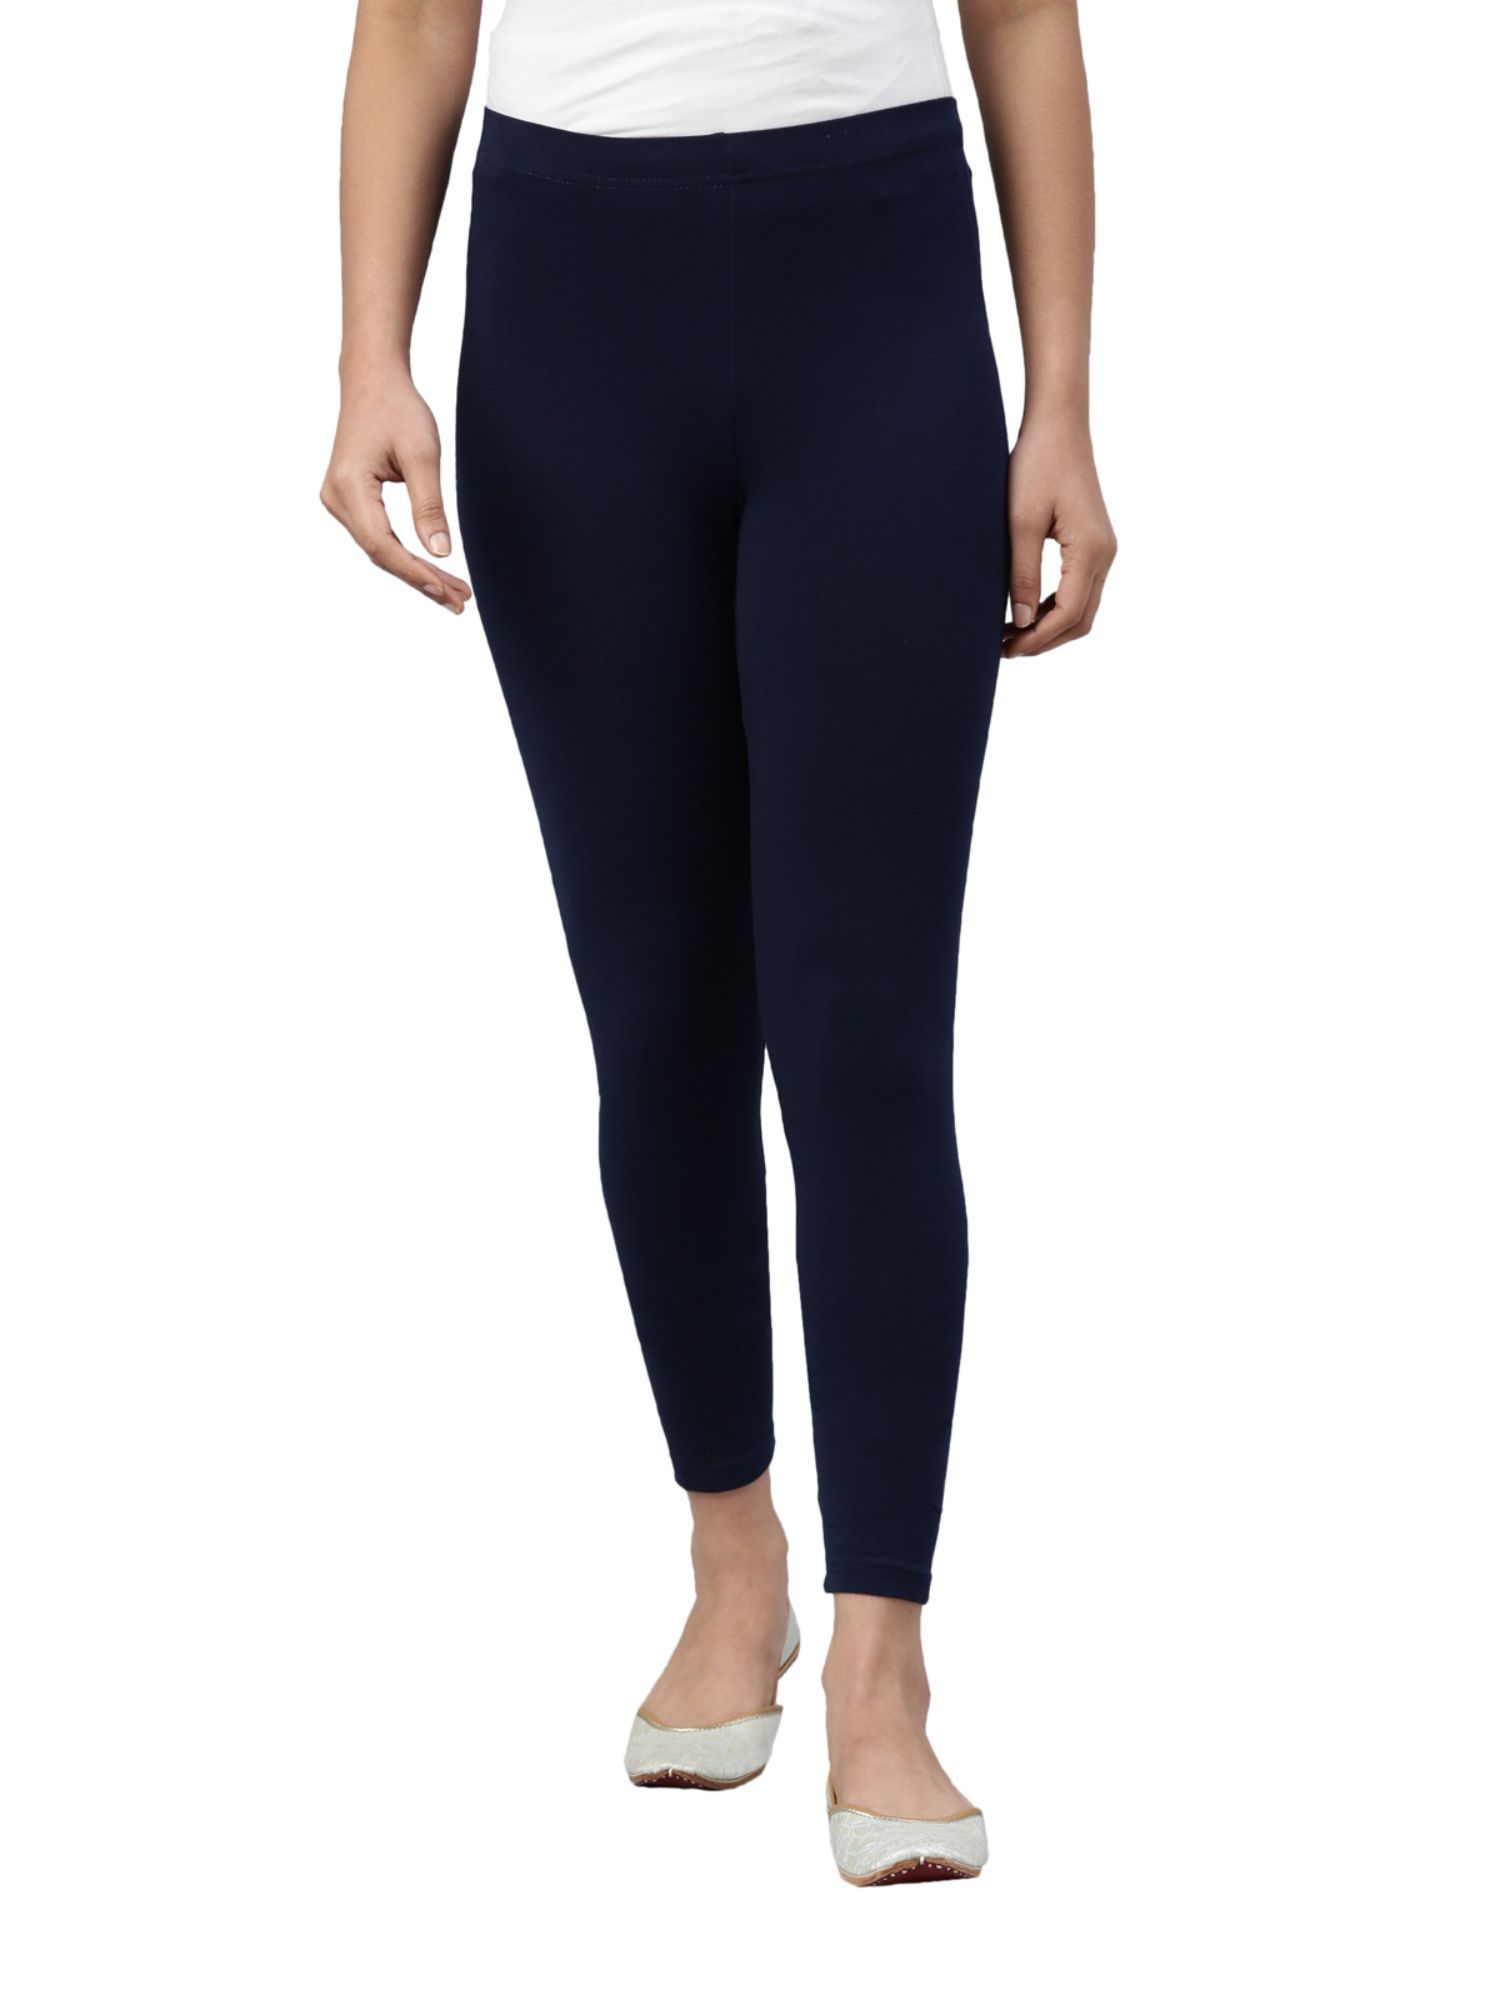 High Waist Ladies Pastel Blue Ankle Length Legging, Casual Wear, Skin Fit  at Rs 155 in Bengaluru